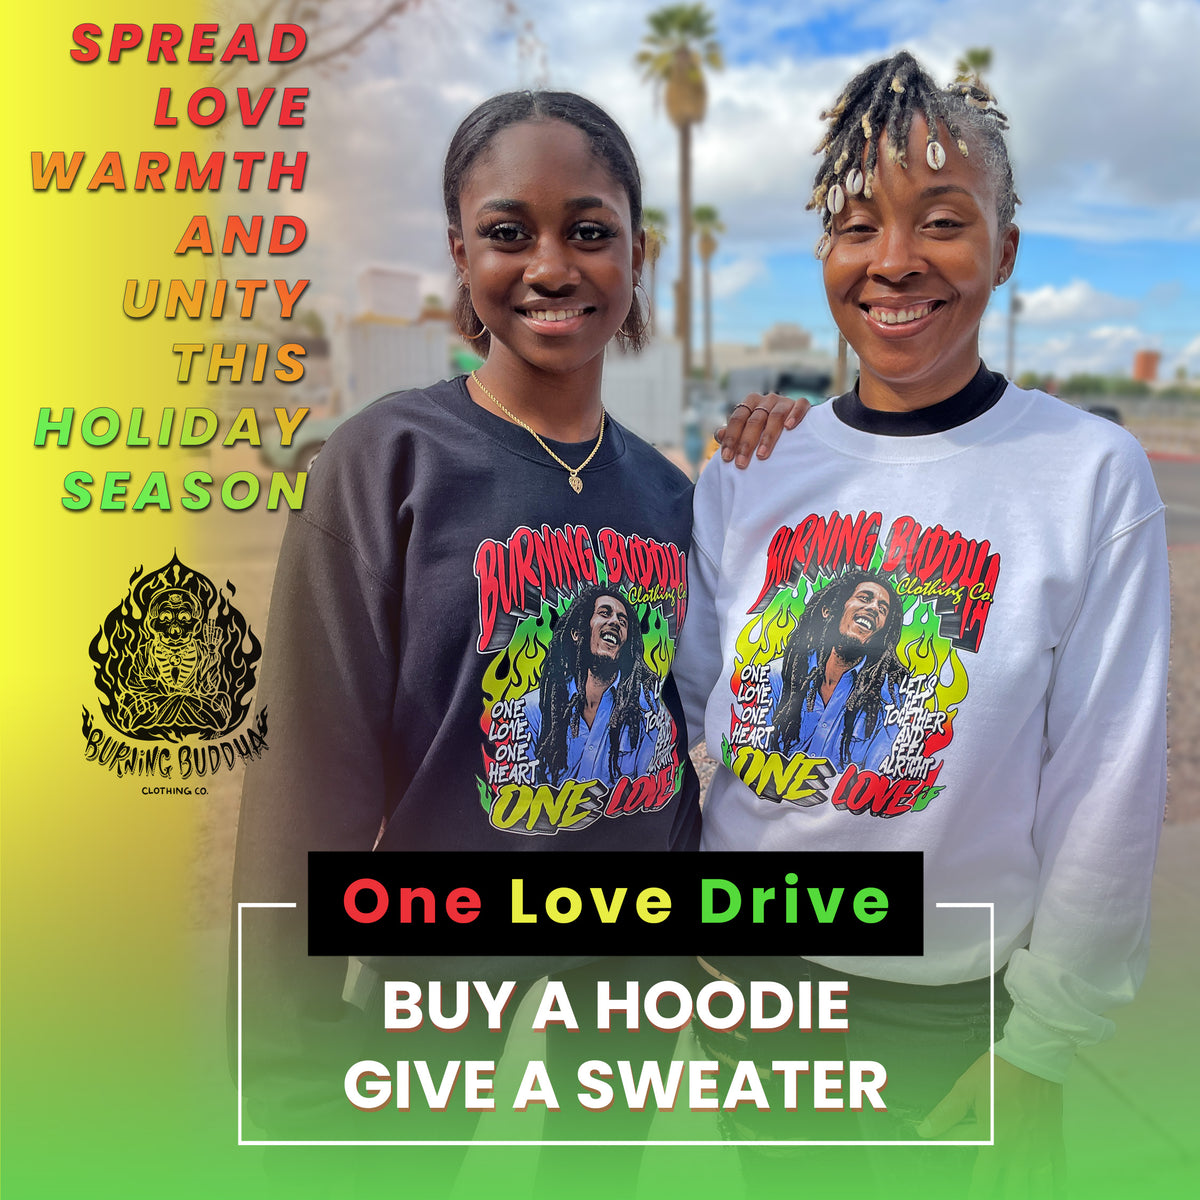 Burning Buddha Clothing Co. One Love Drive Image and info